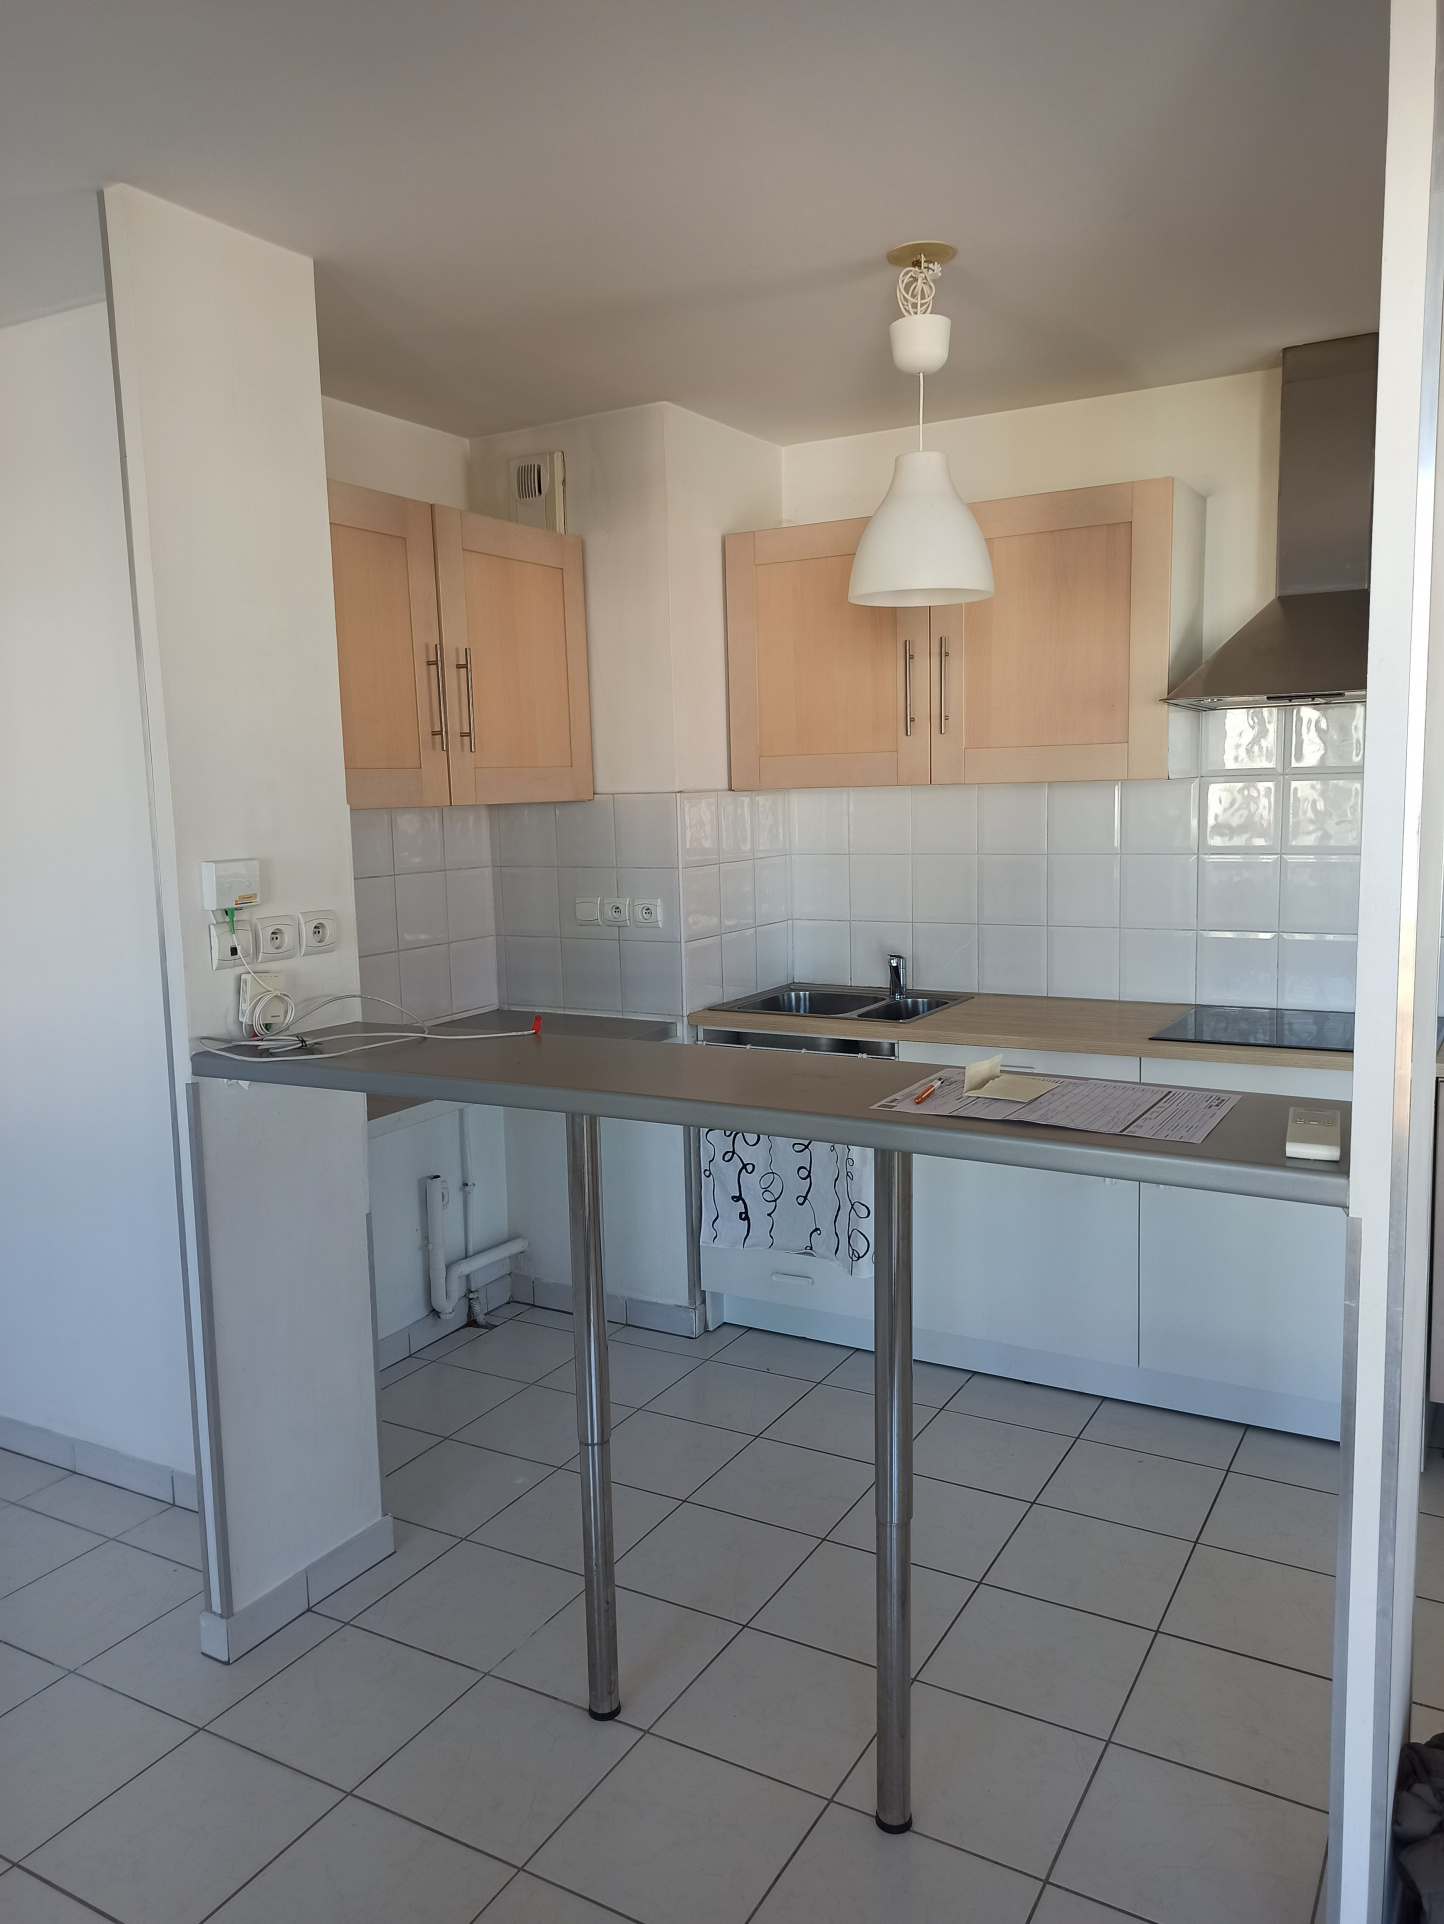 Toulouse,31200,3 Rooms Rooms,Appartement,1002